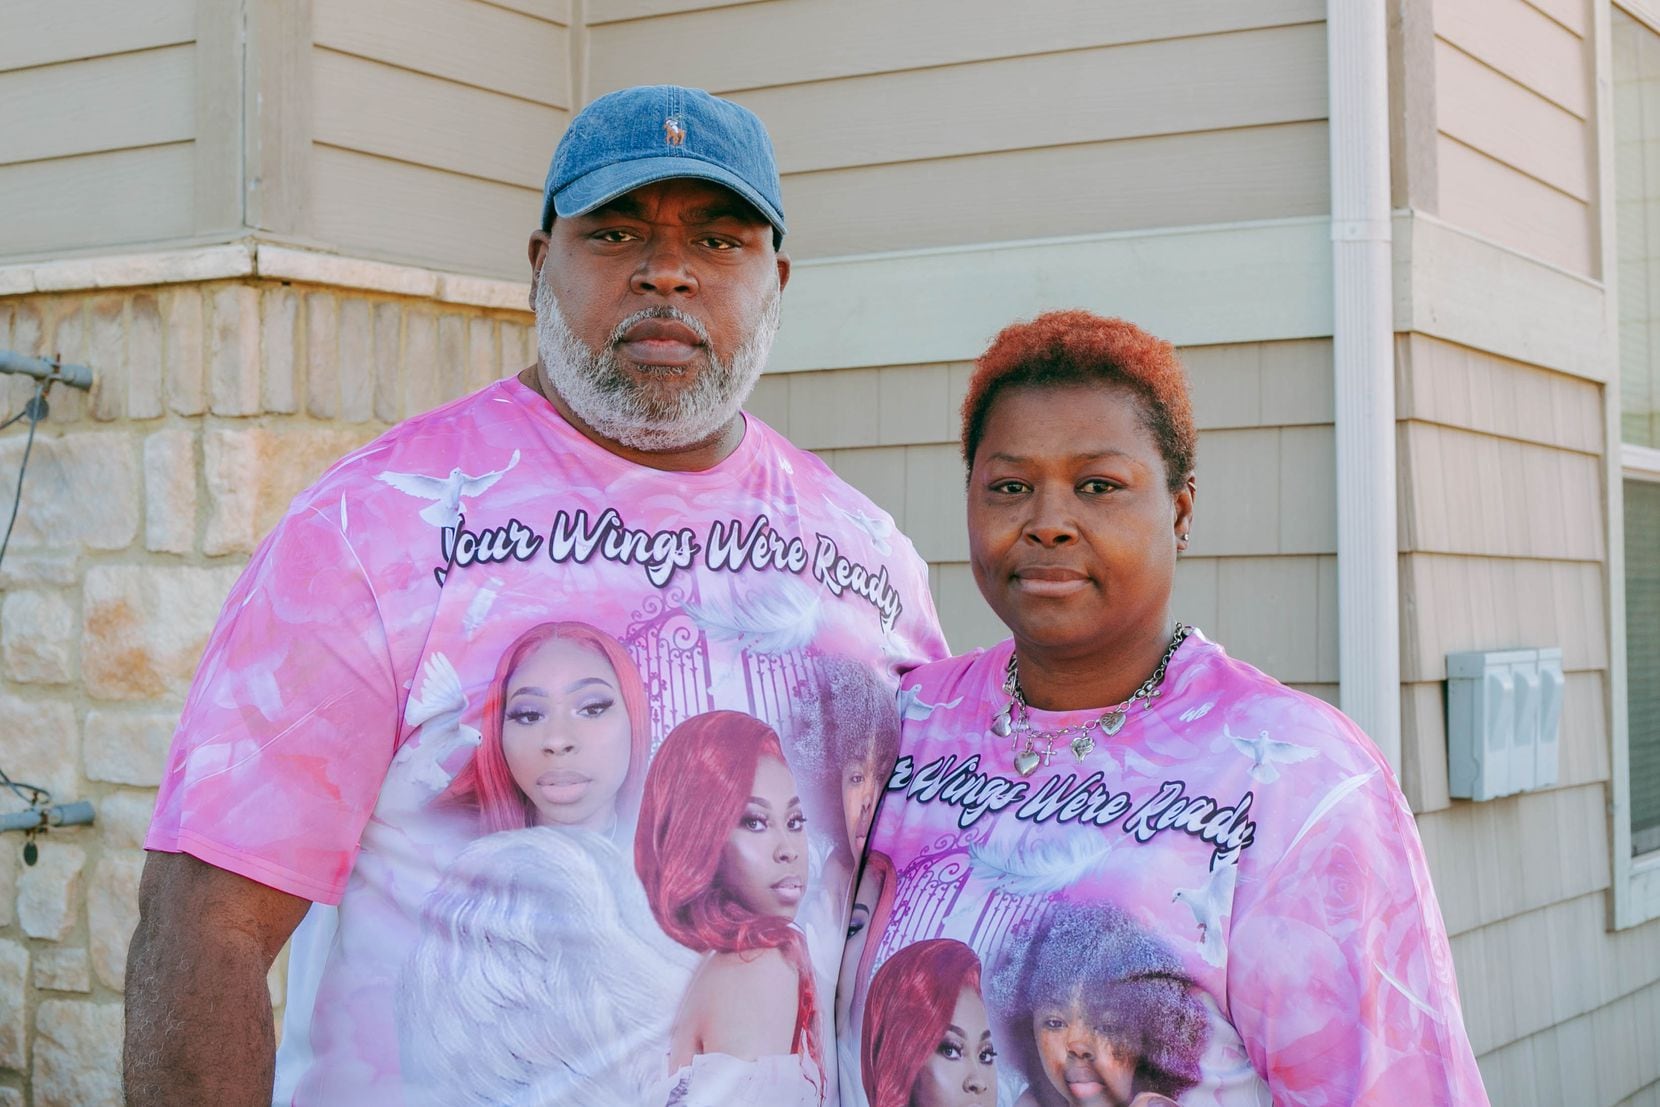 Timothy Jones Sr. and Deidra Jones, Timeria's parents, hope that someone with information about their daughter's death will come forward to help police solve the case.